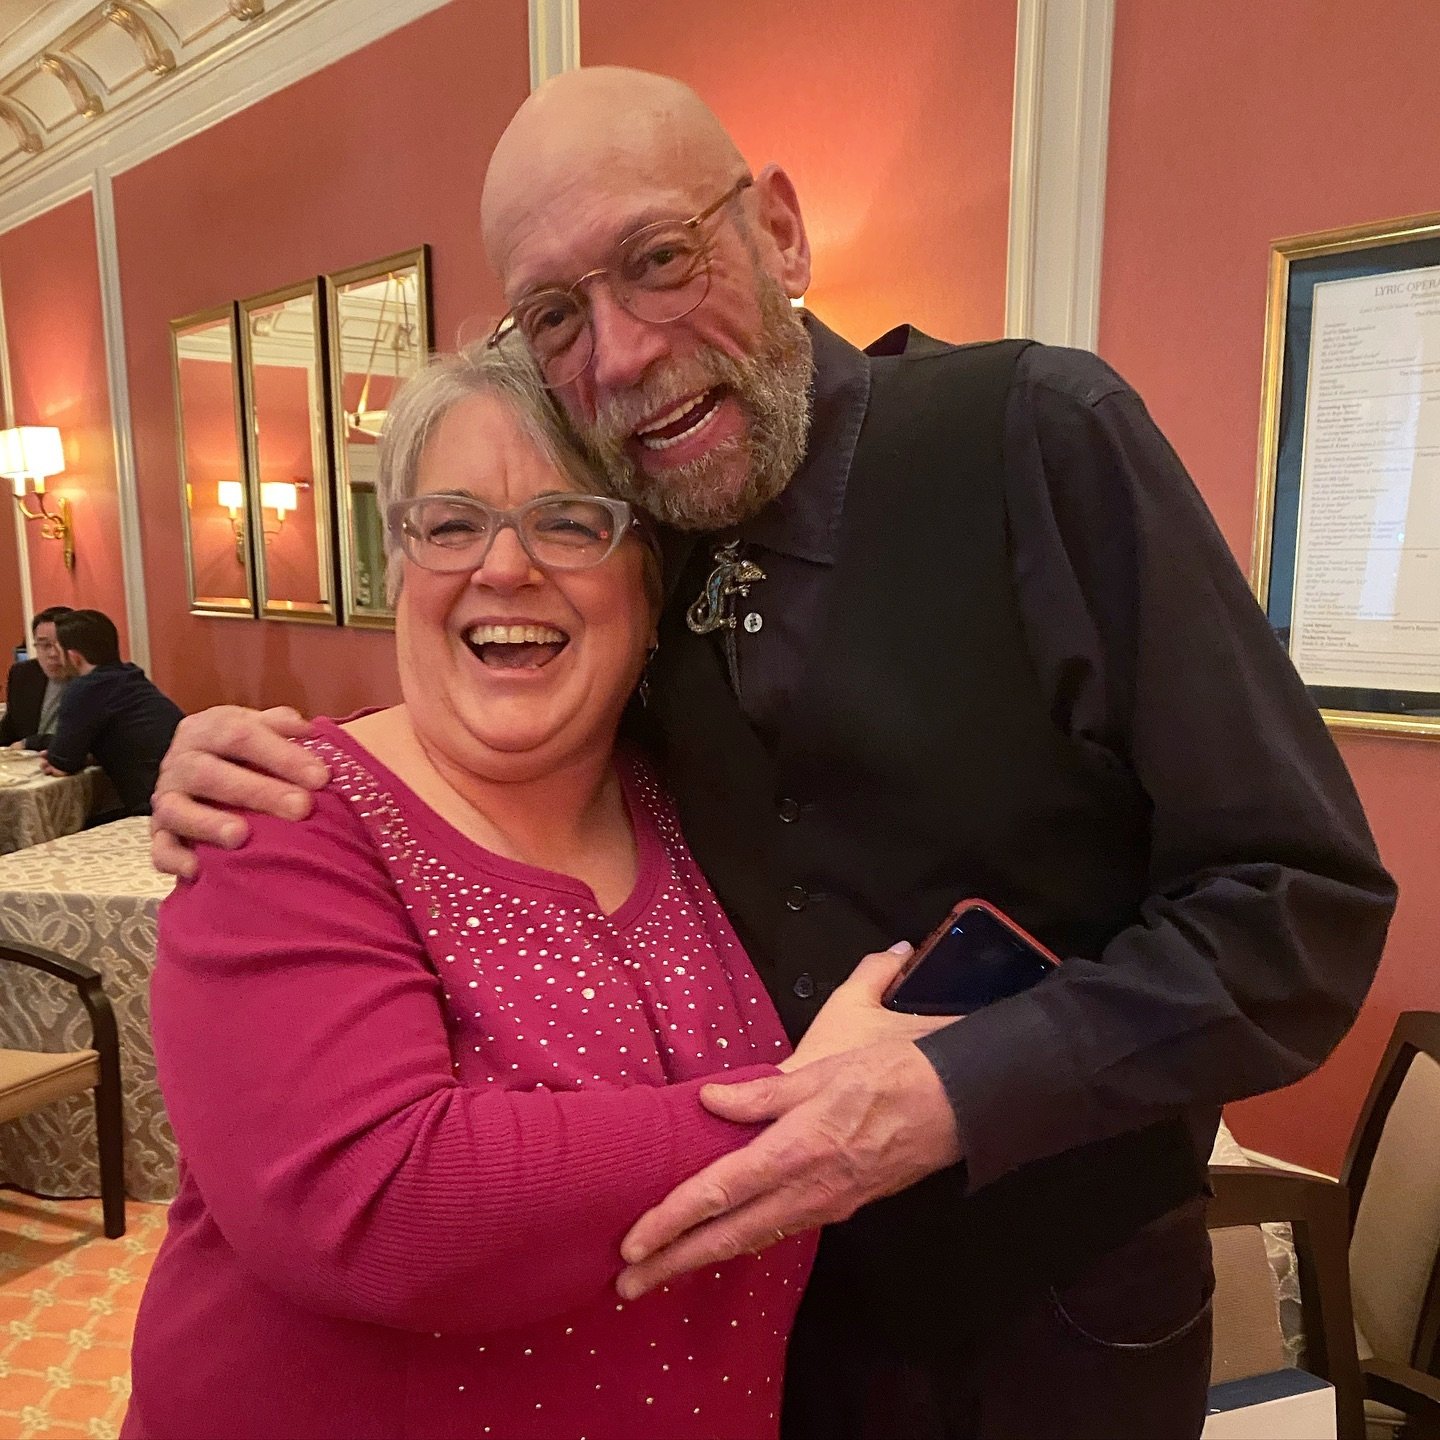 Please join us in wishing these two a joyful retirement! You will be missed! Congratulations Sharon Garvey-Cohen &amp; Tom Potter!!